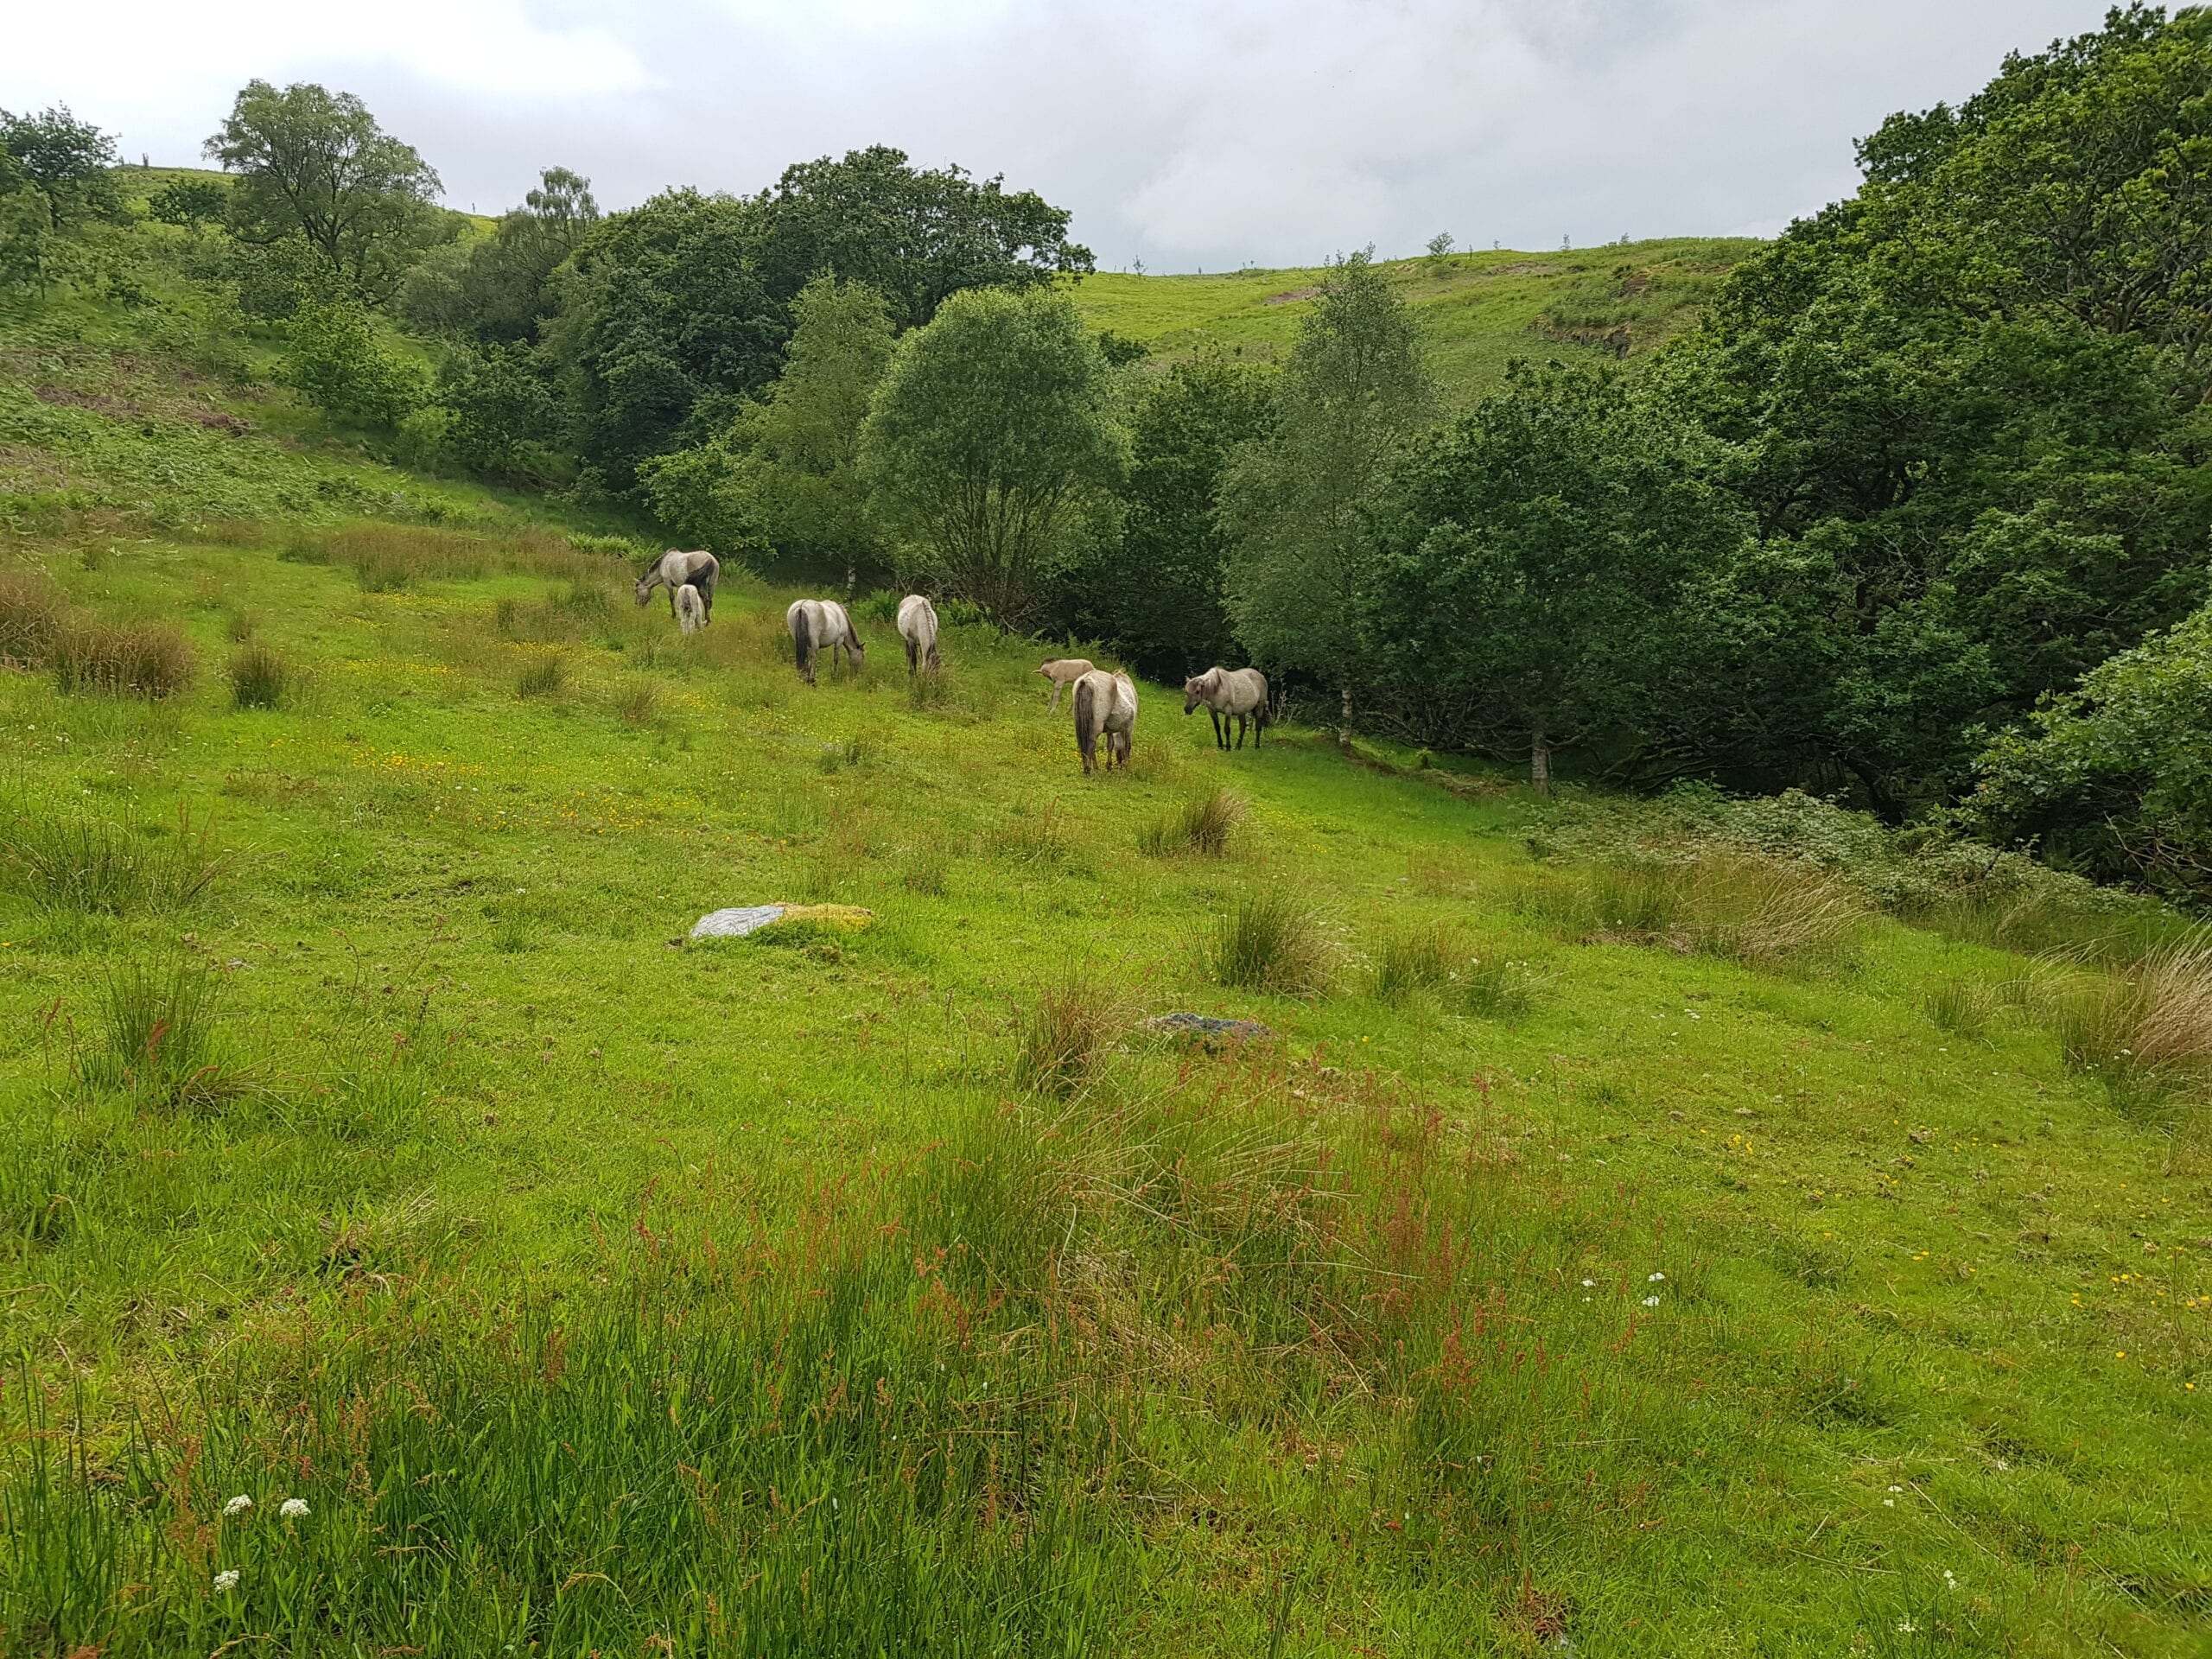 Horses in woodland glade